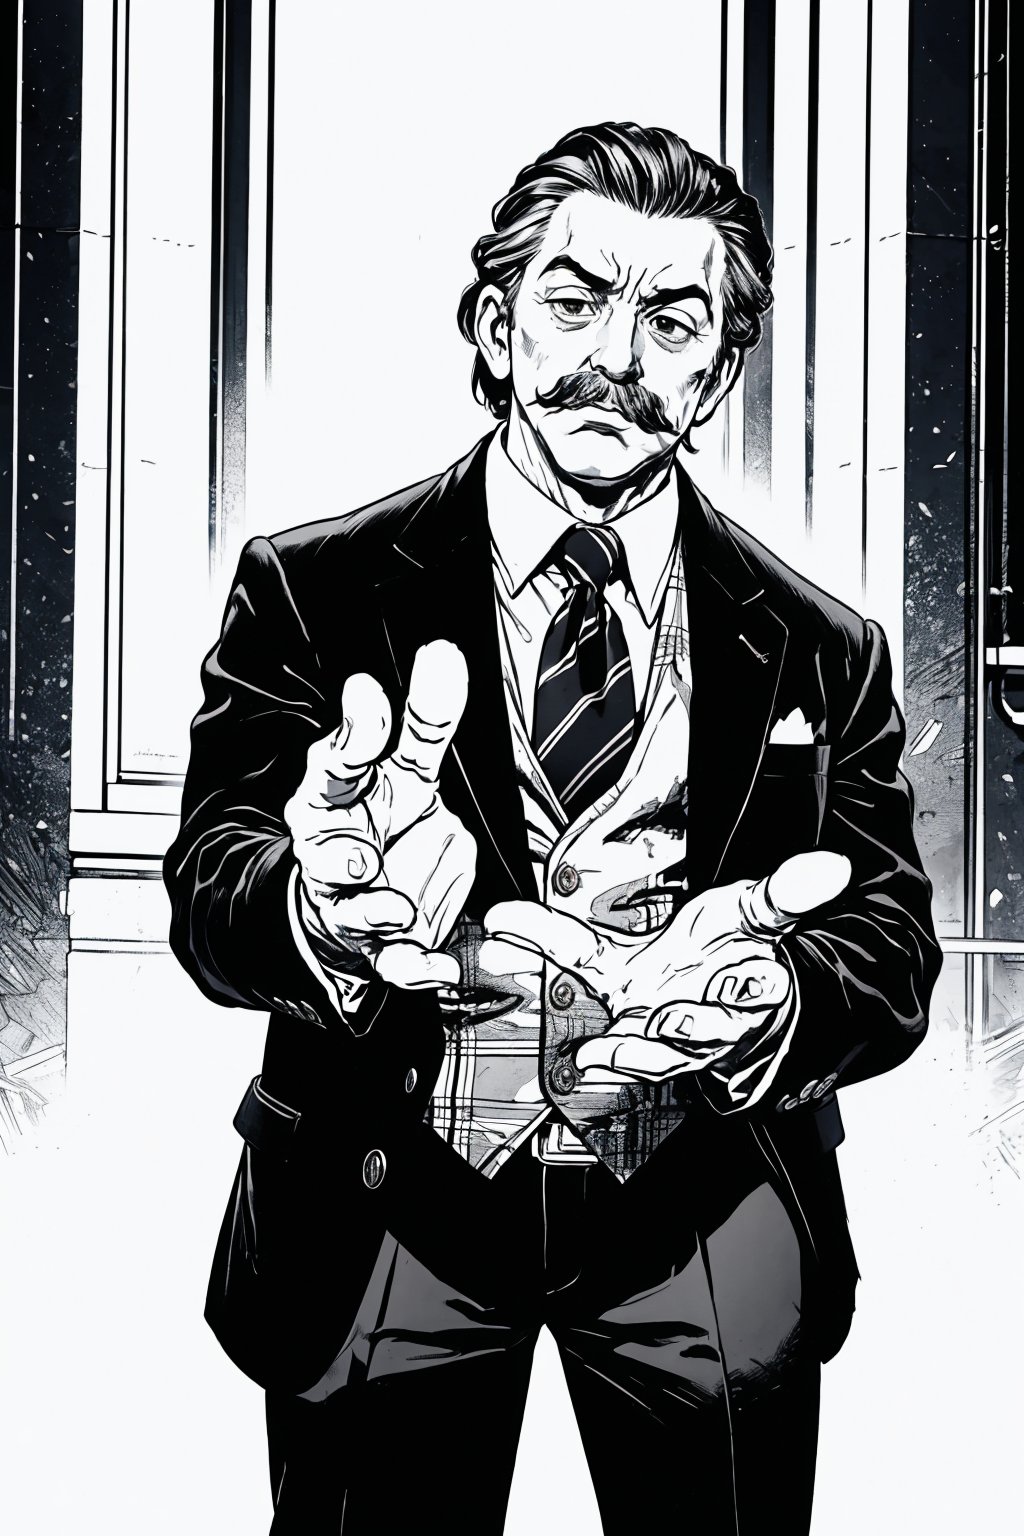 boichi manga style, monochrome, greyscale, he is Walt Disney, the founder of Disneyland, slicked hairstyle, mustache, plaid suit, he spreads his hands, indicating that he has no money, his expression is very sad and helpless, full body shot, ((masterpiece))